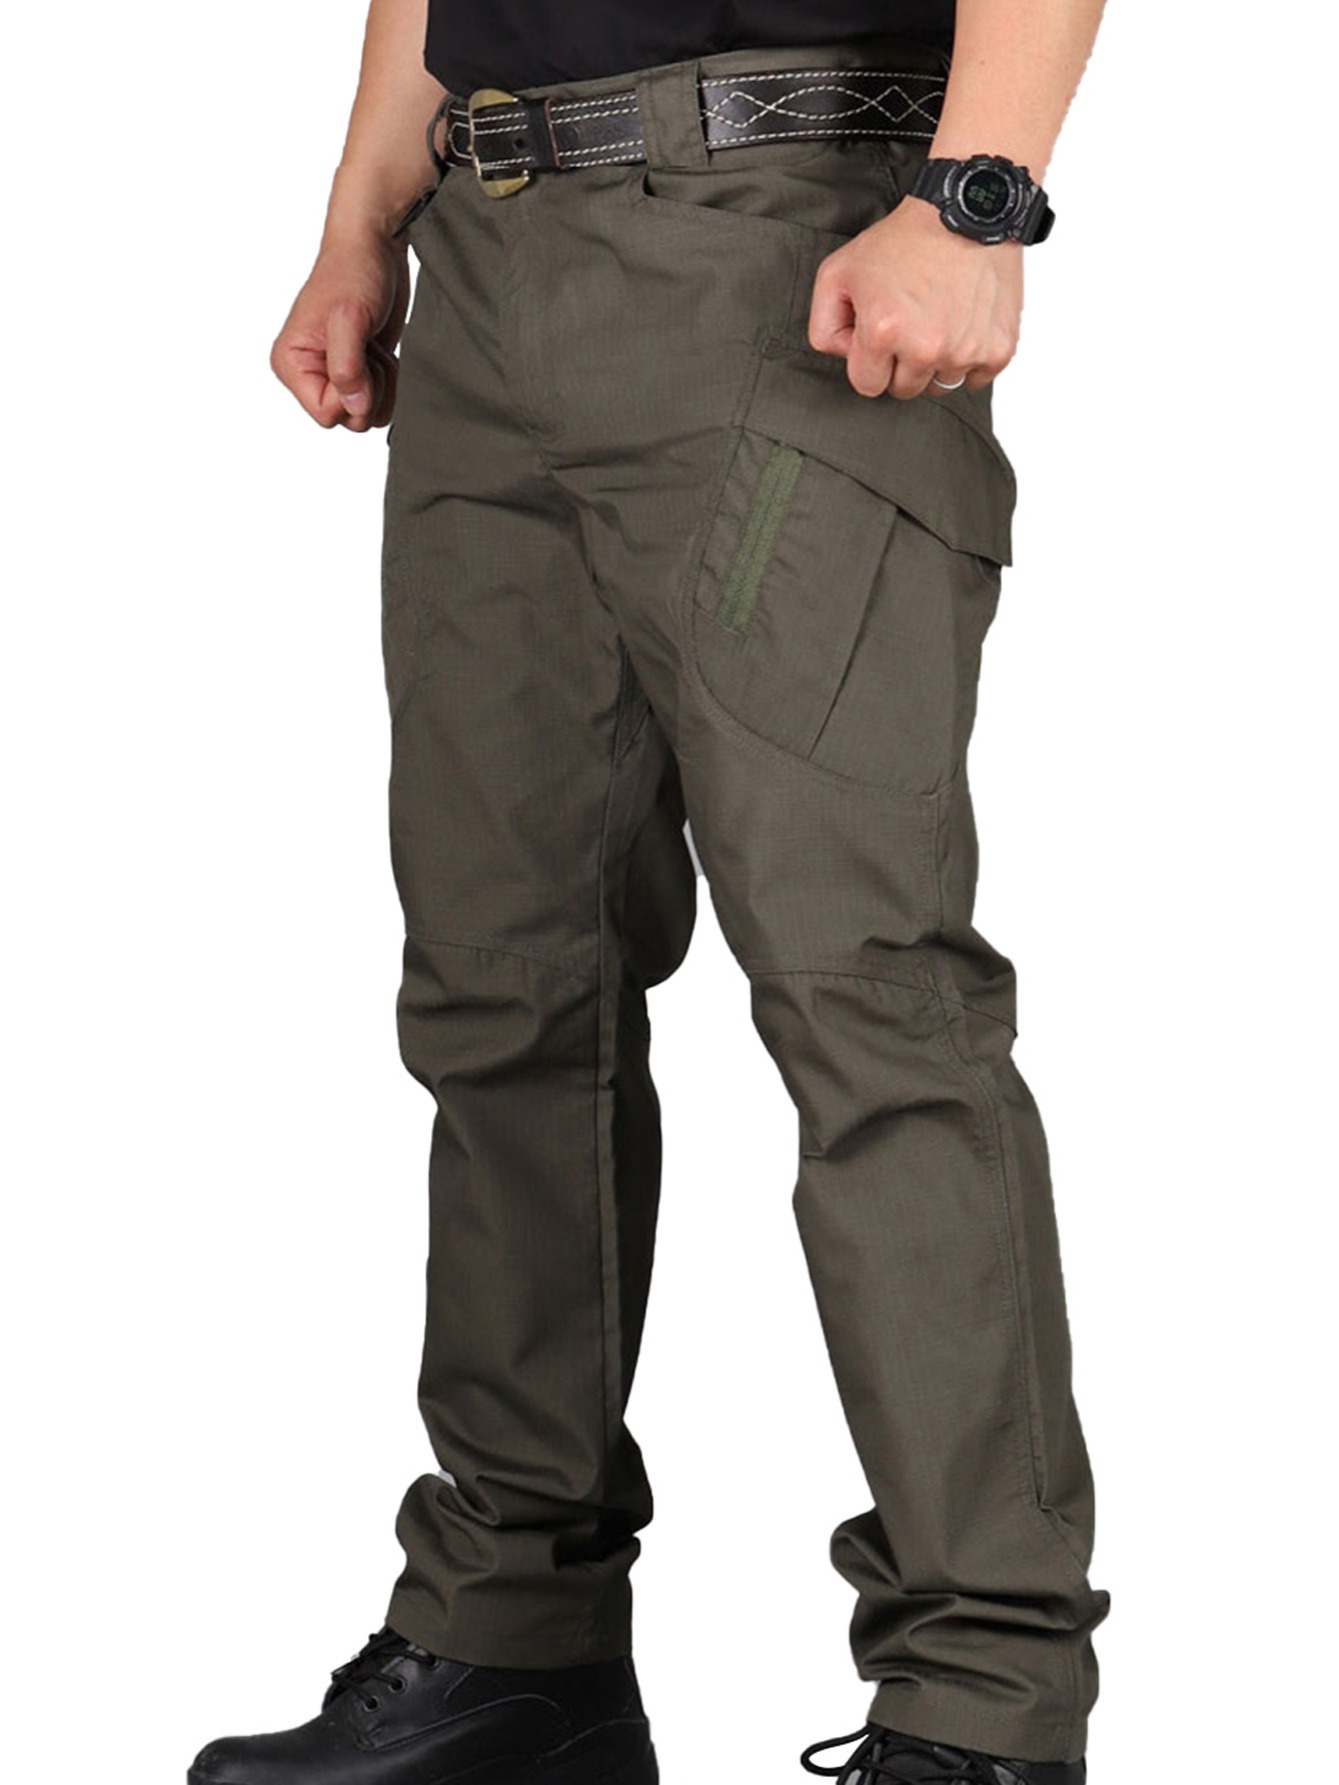 Men's Hiking Pants Online : Buy Camping & Hiking Pants for Men in India @  Best Prices - Amazon.in